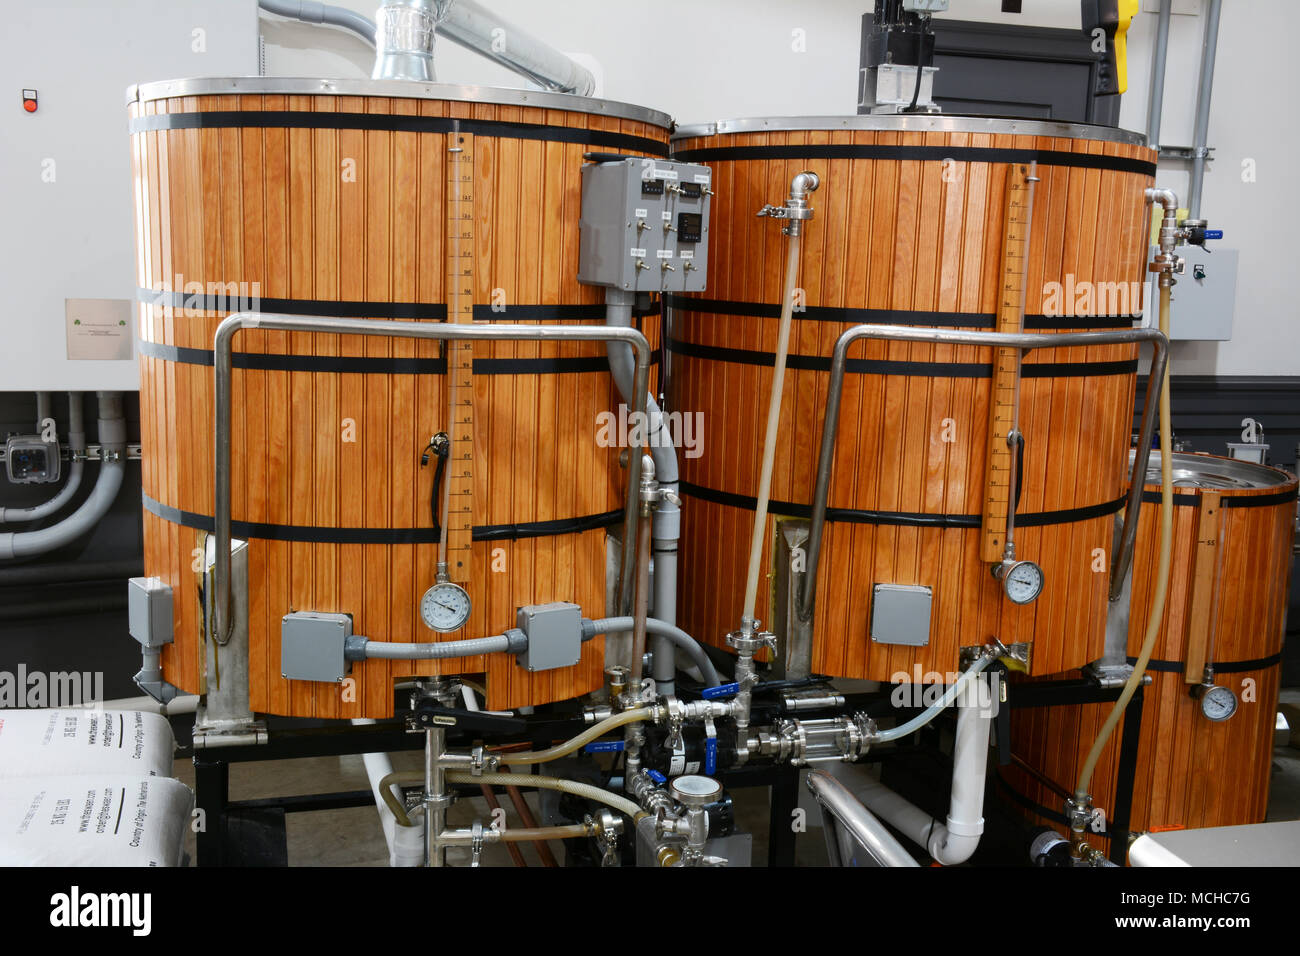 A small custom made 3 Barrel Craft Beer Brewing System of the Breaker Brewing Company of Wilkes Barre Township PA. Stock Photo